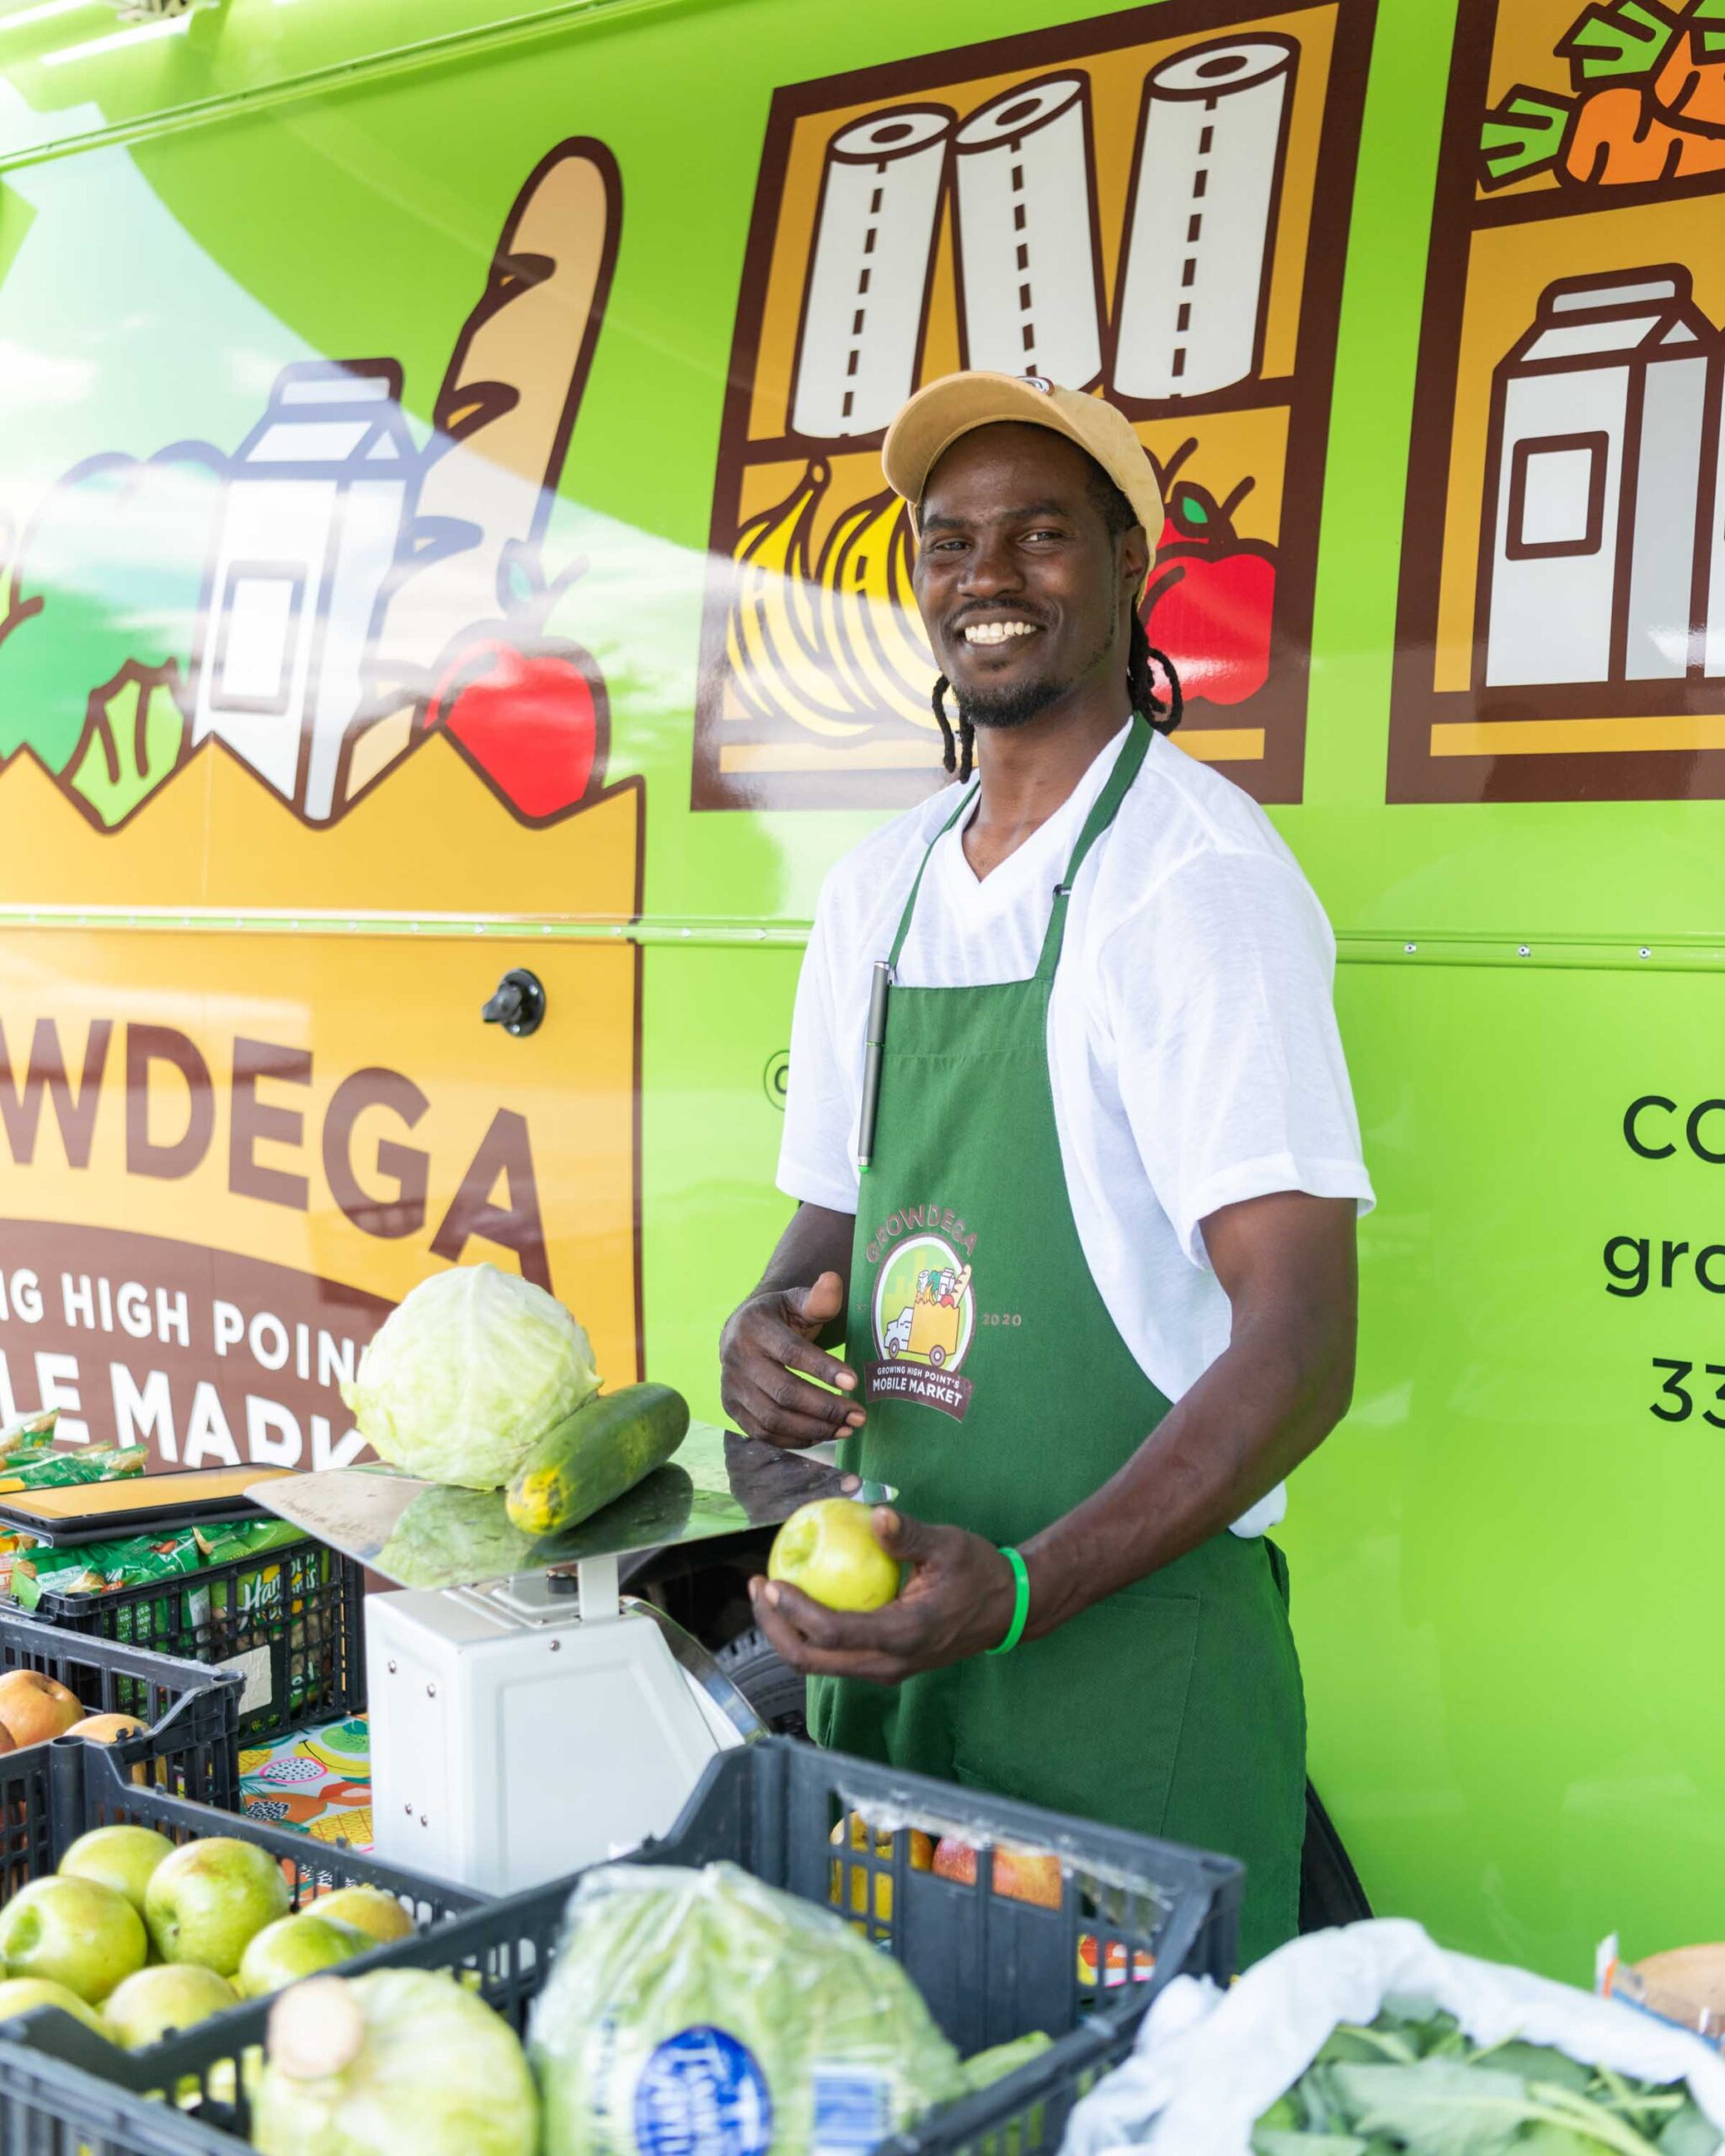 Donnie Matthews, an employee of Growdega stands with produce.